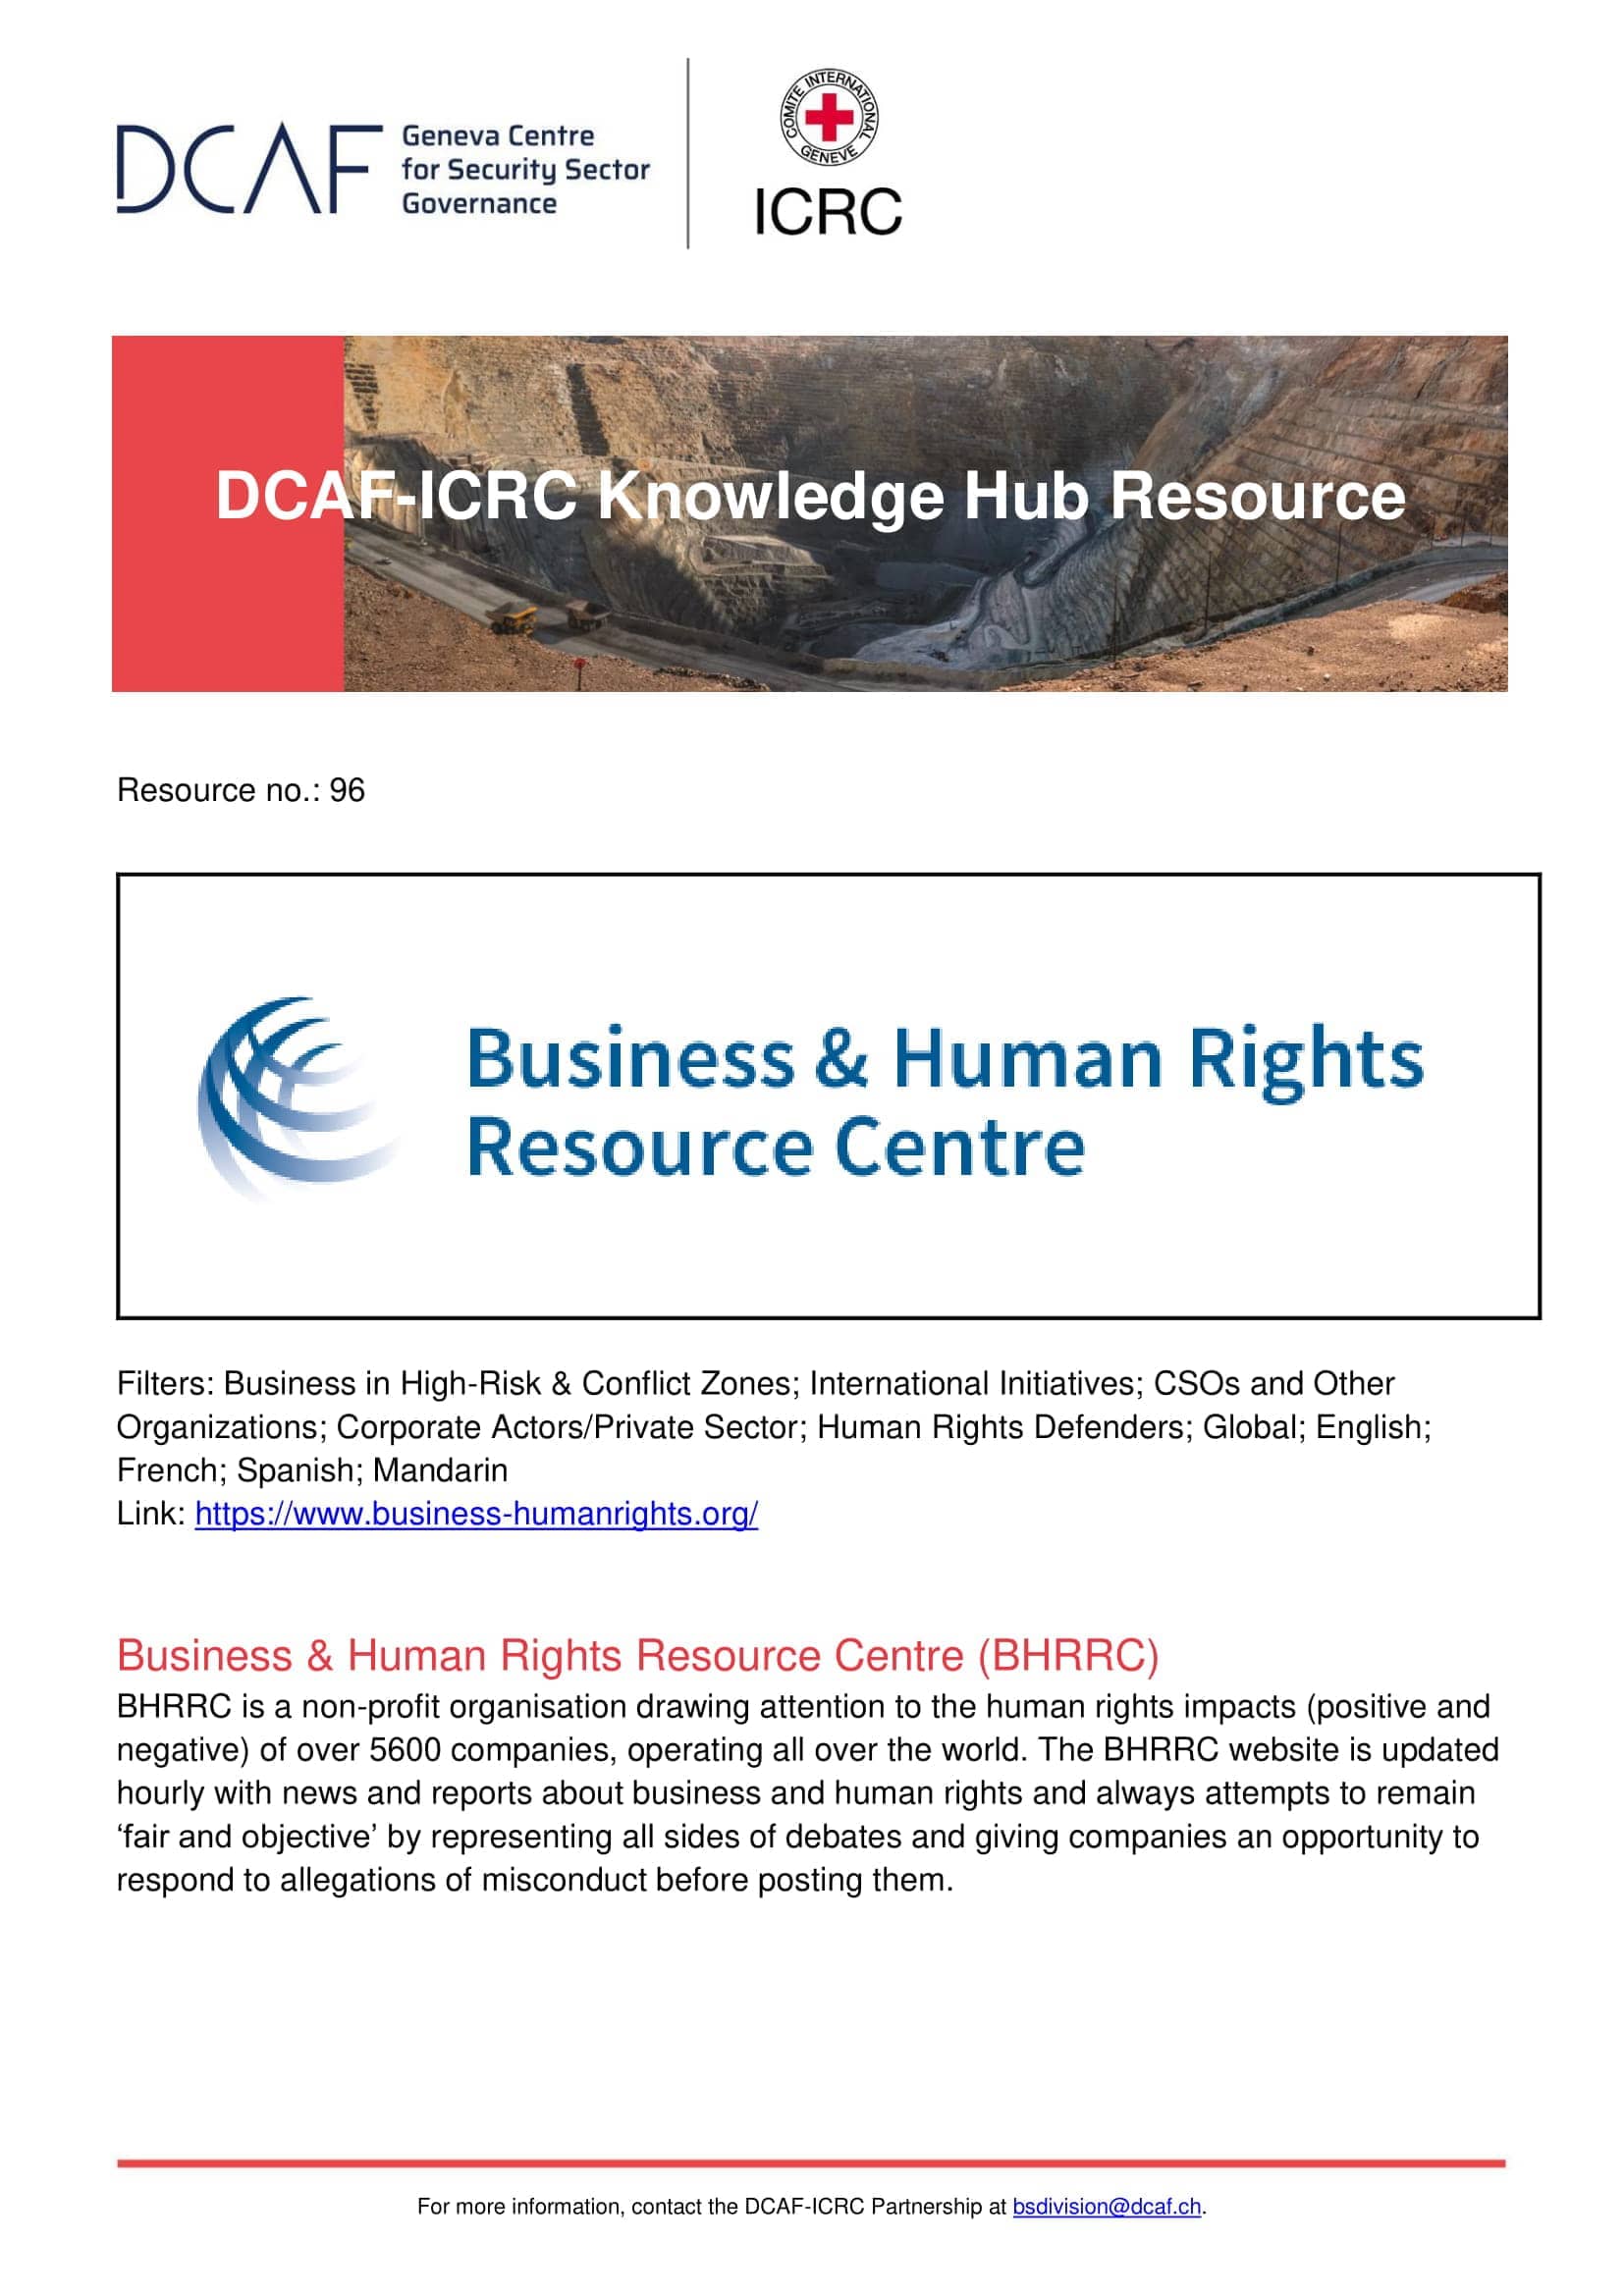 Business & Human Rights Resource Centre (BHRRC)